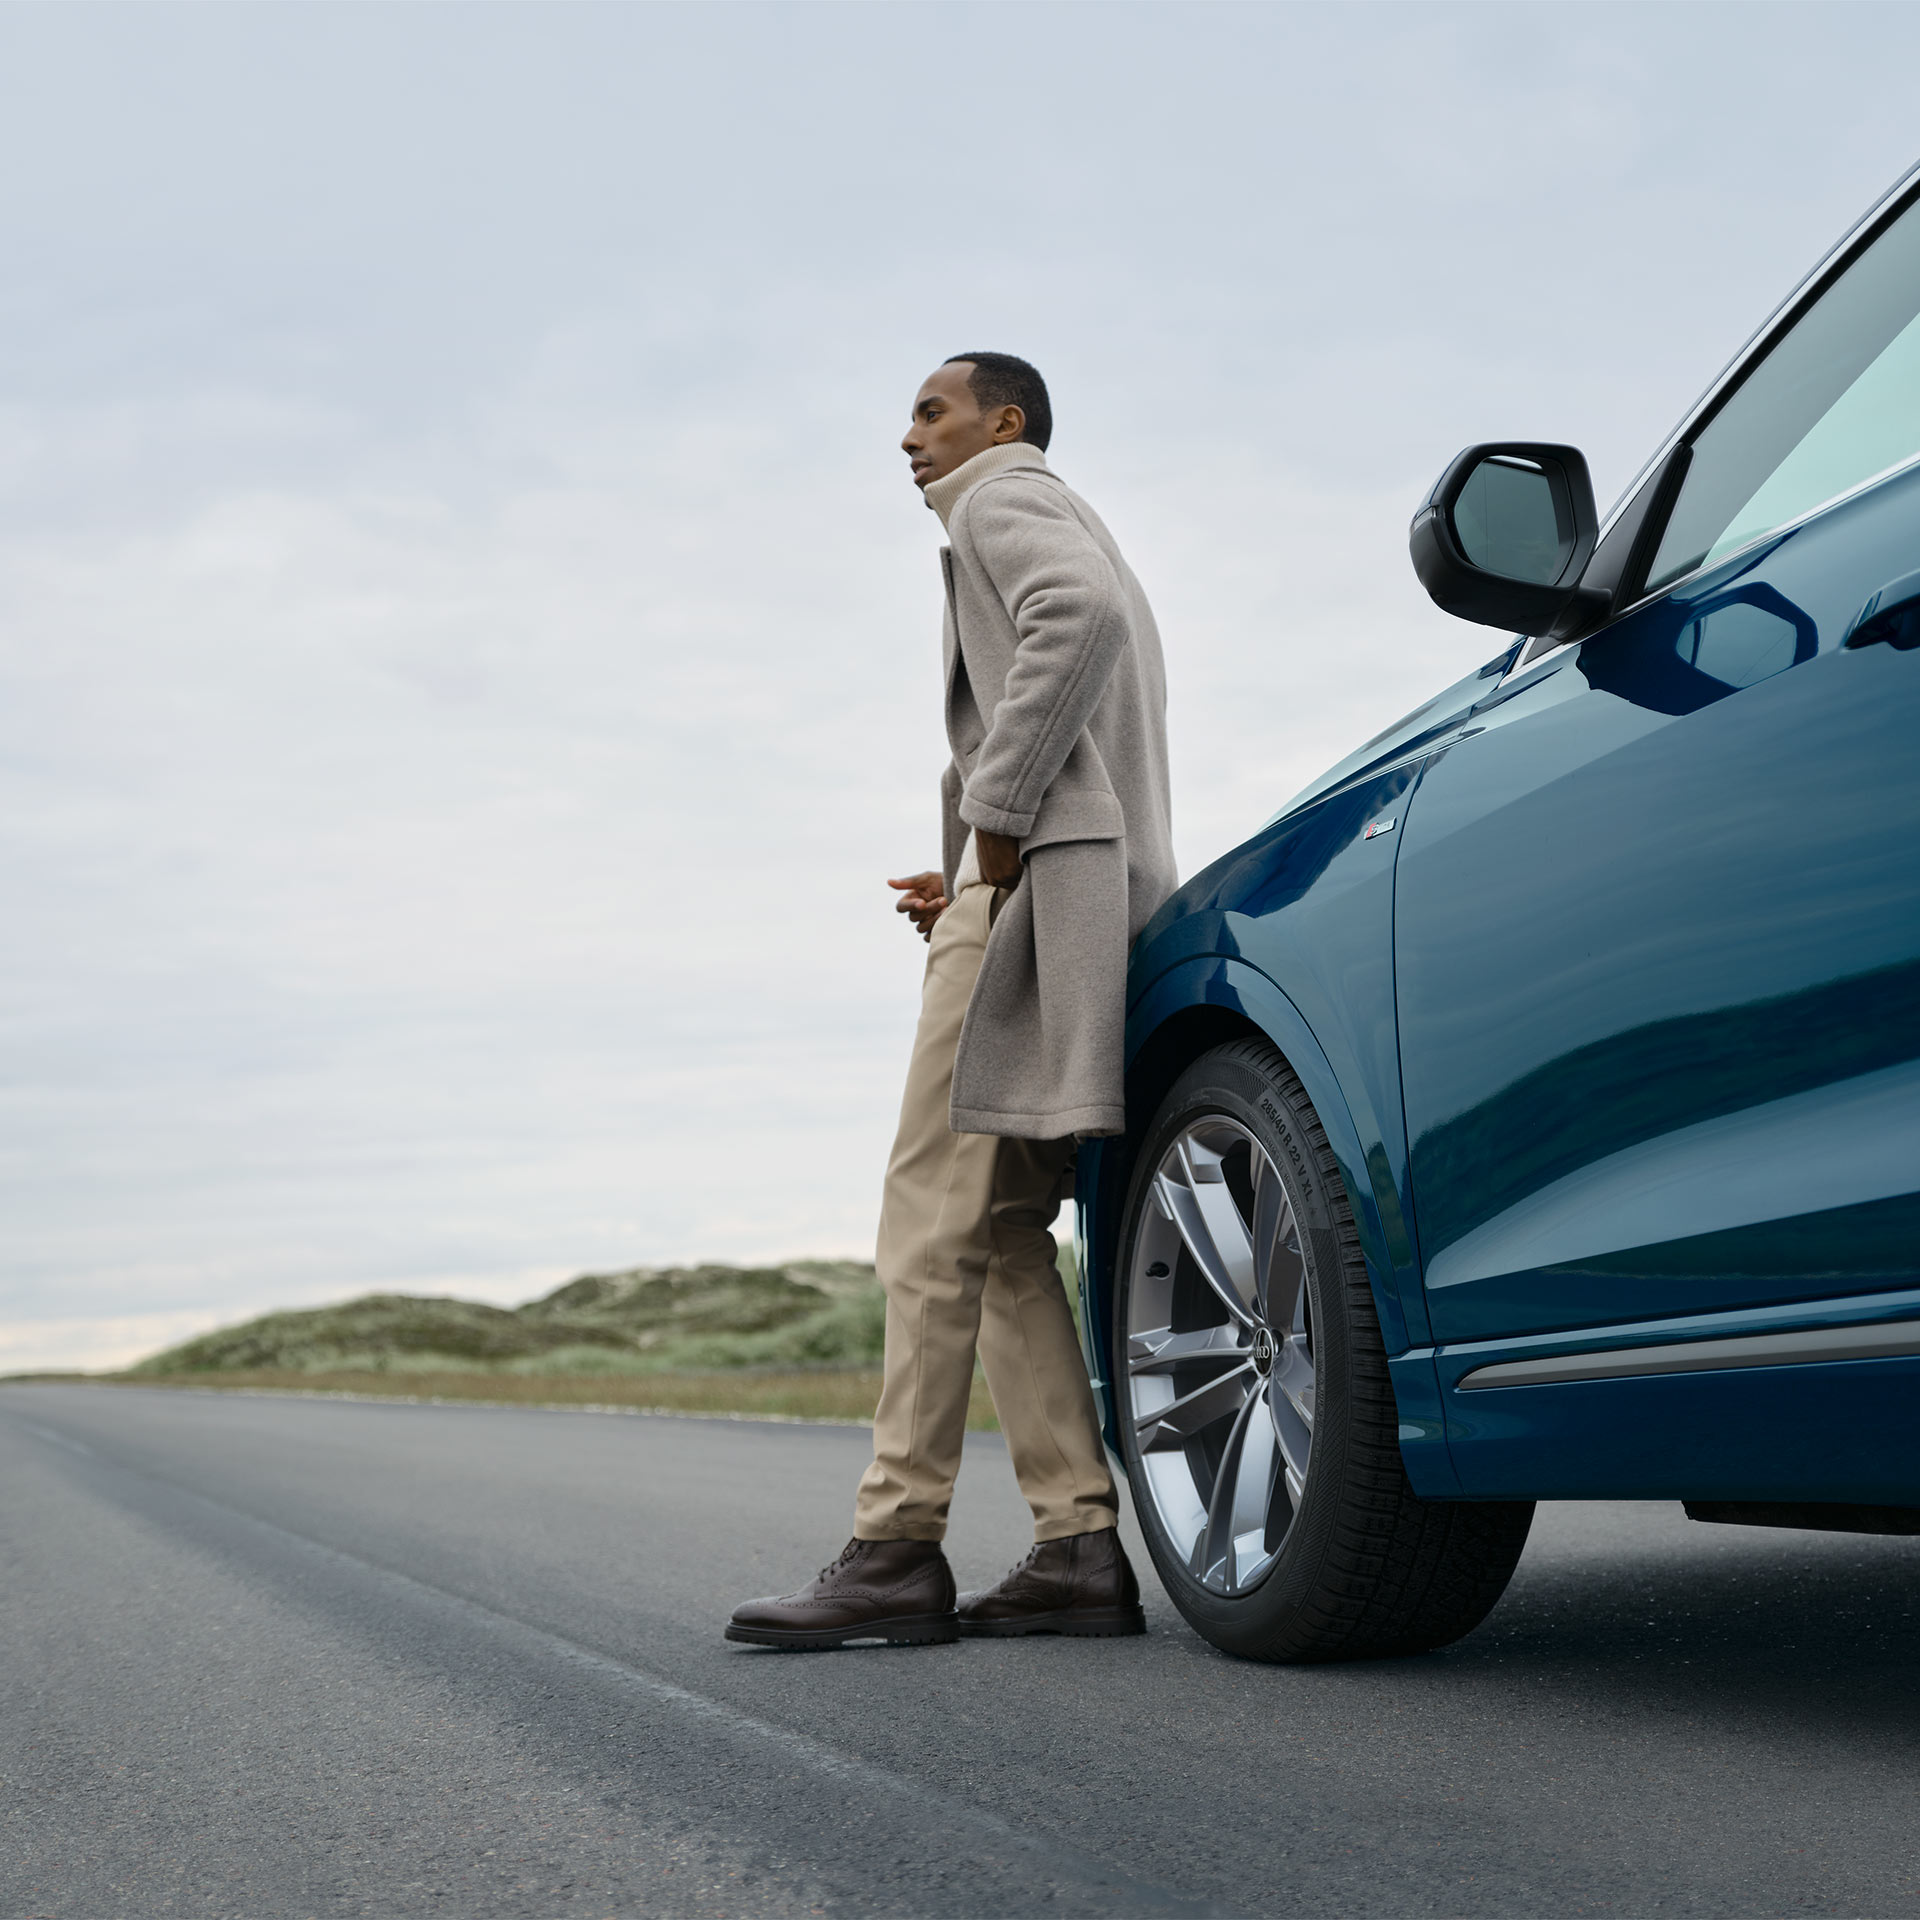 A man leaning against the side of a blue Audi parked in the countryside